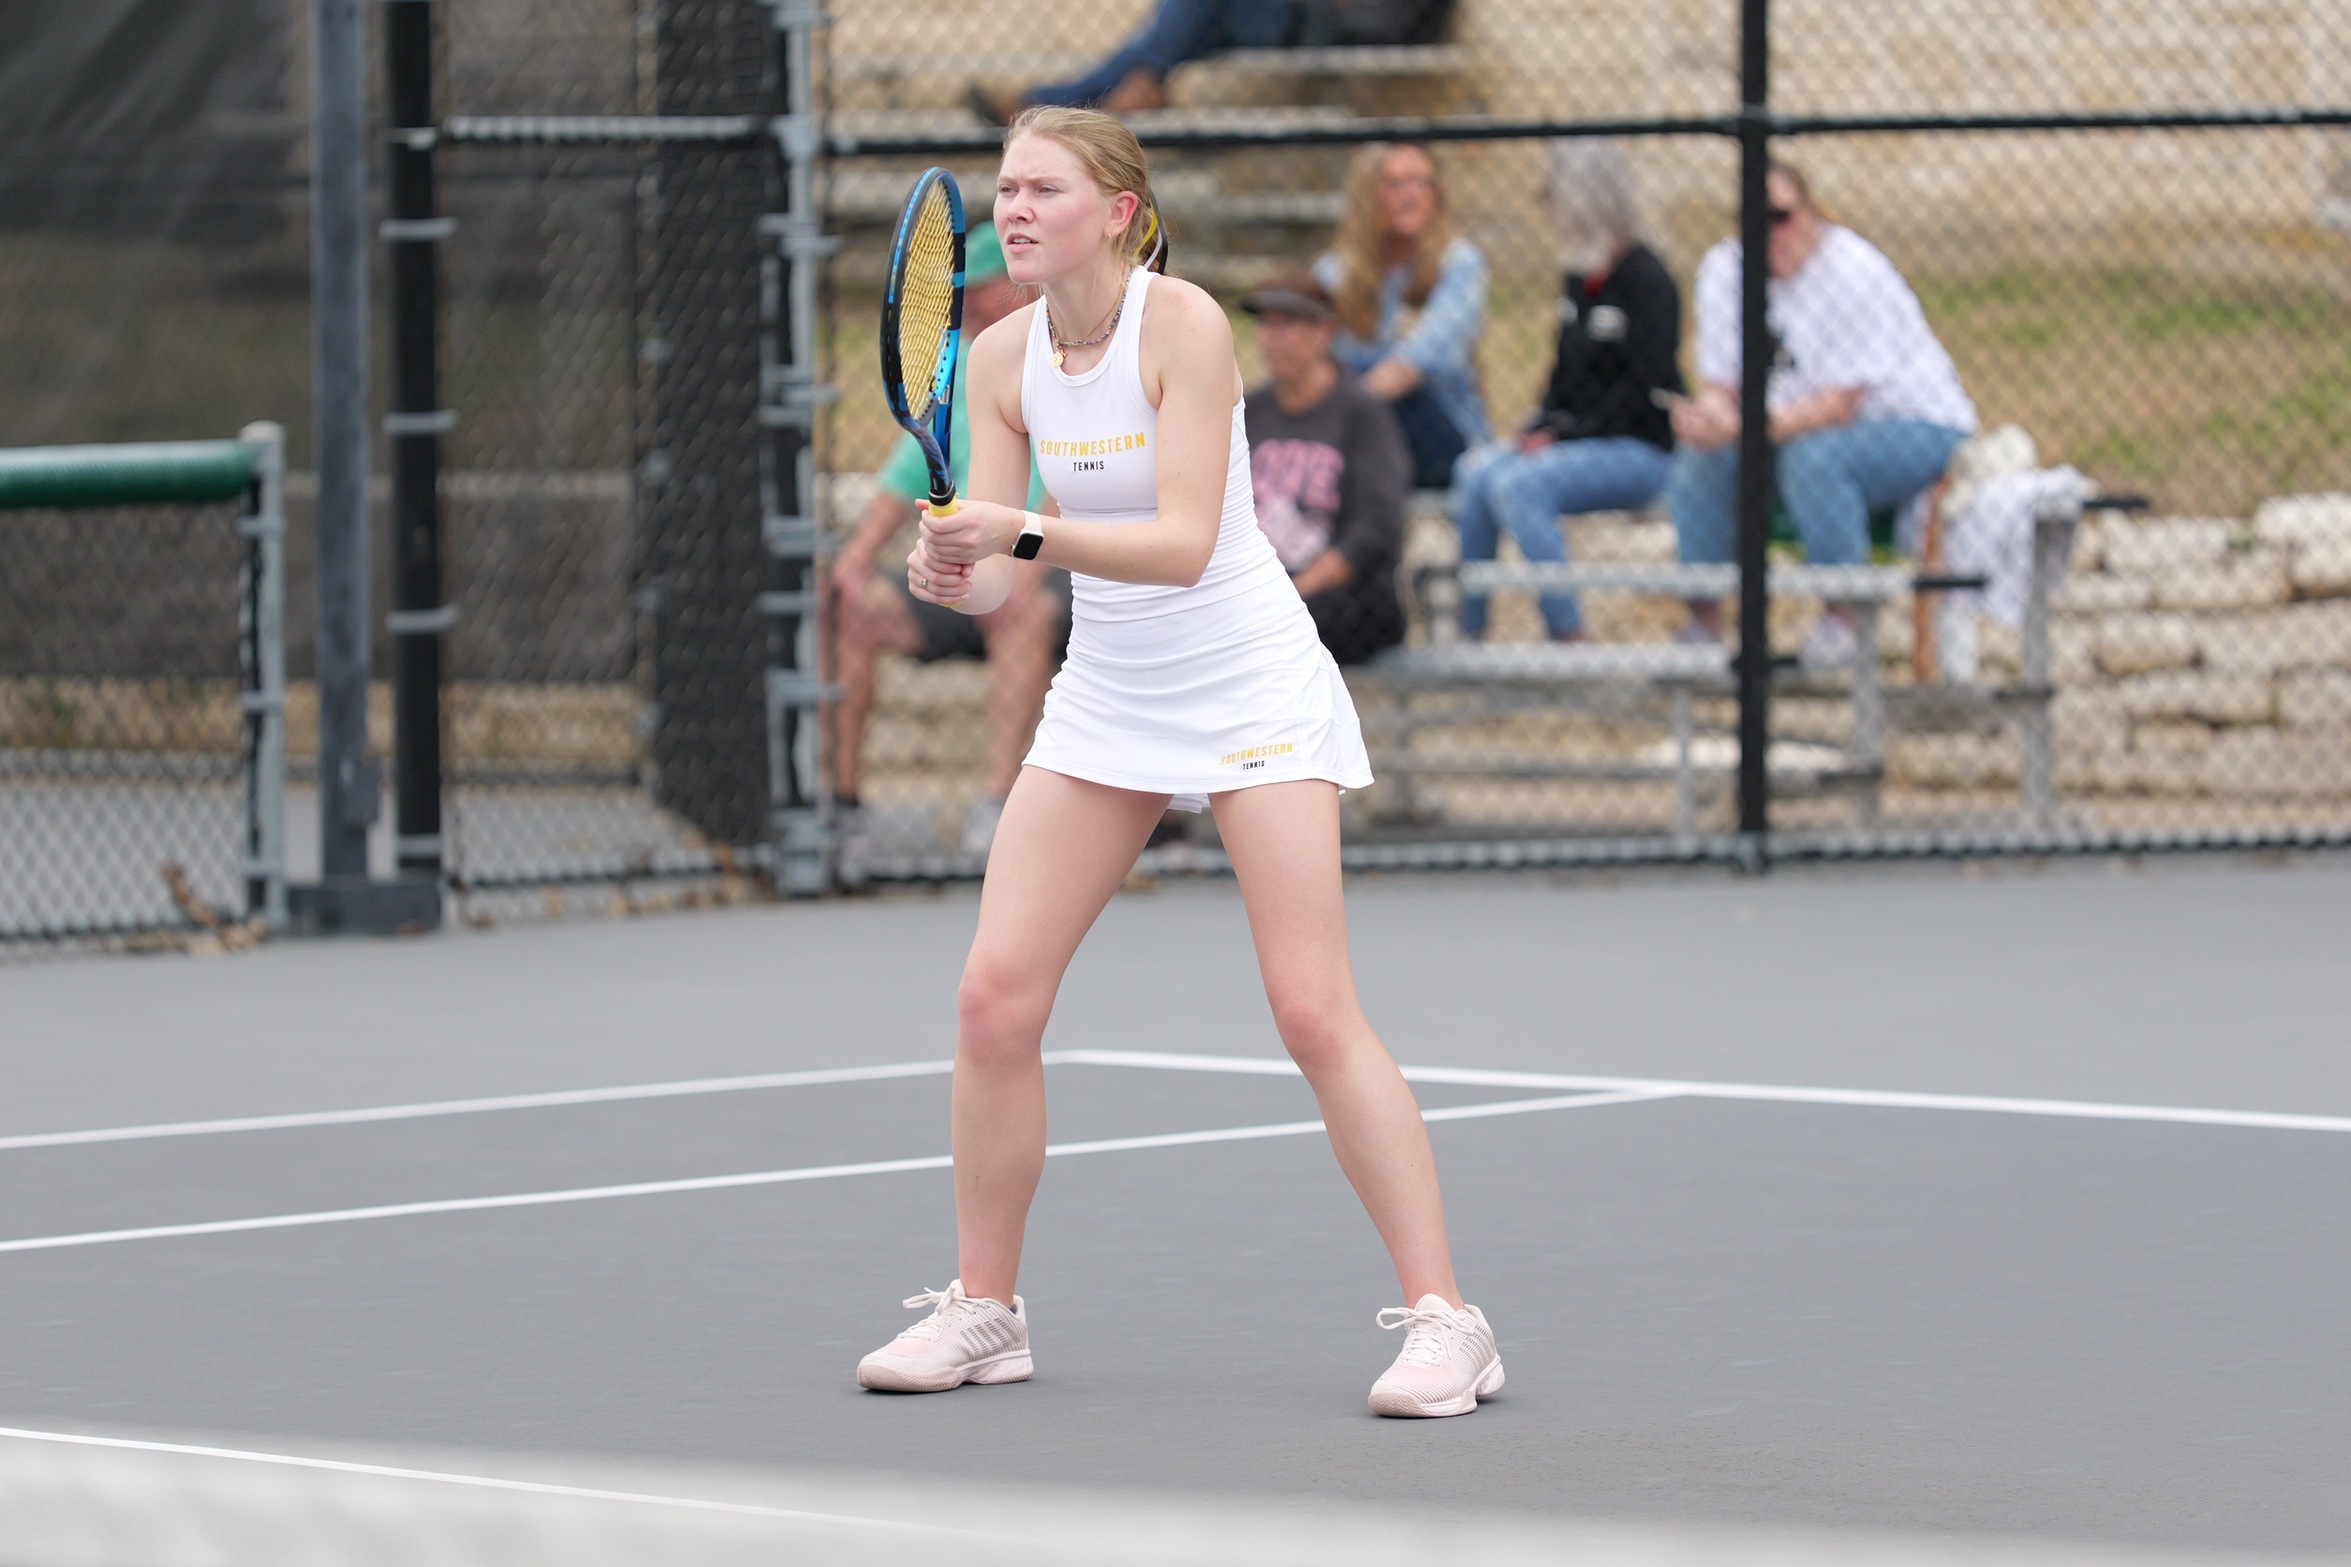 Women's Tennis Wraps Up Trip To Virginia With A Win